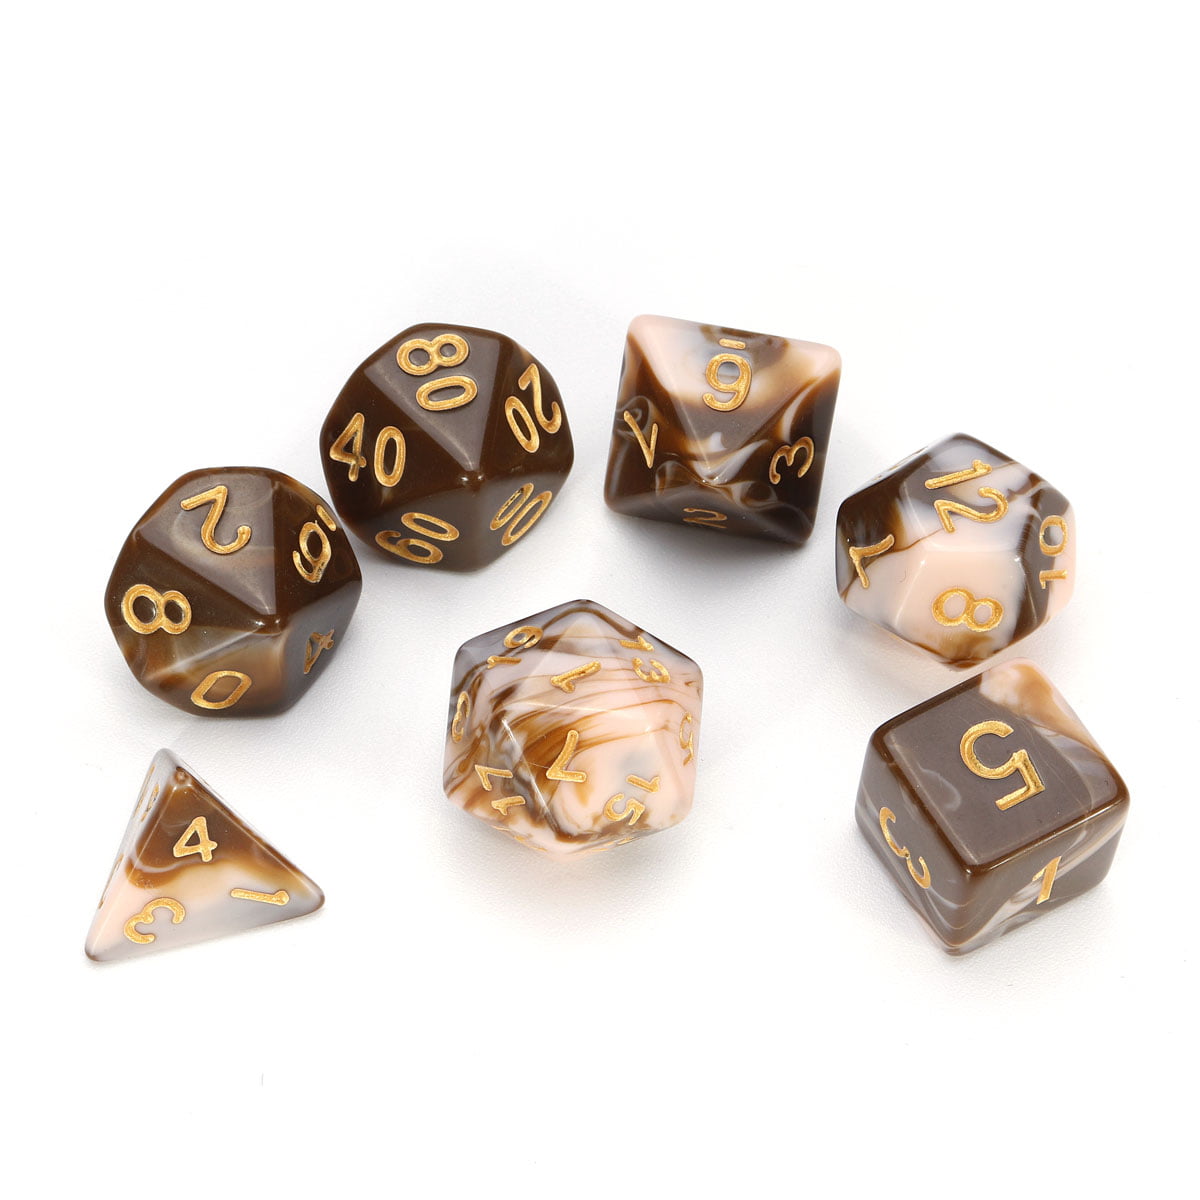 7X Dice Set TRPG For DND Multi Sided D4-D20 Acrylic Transparent 6 Colors F fC 